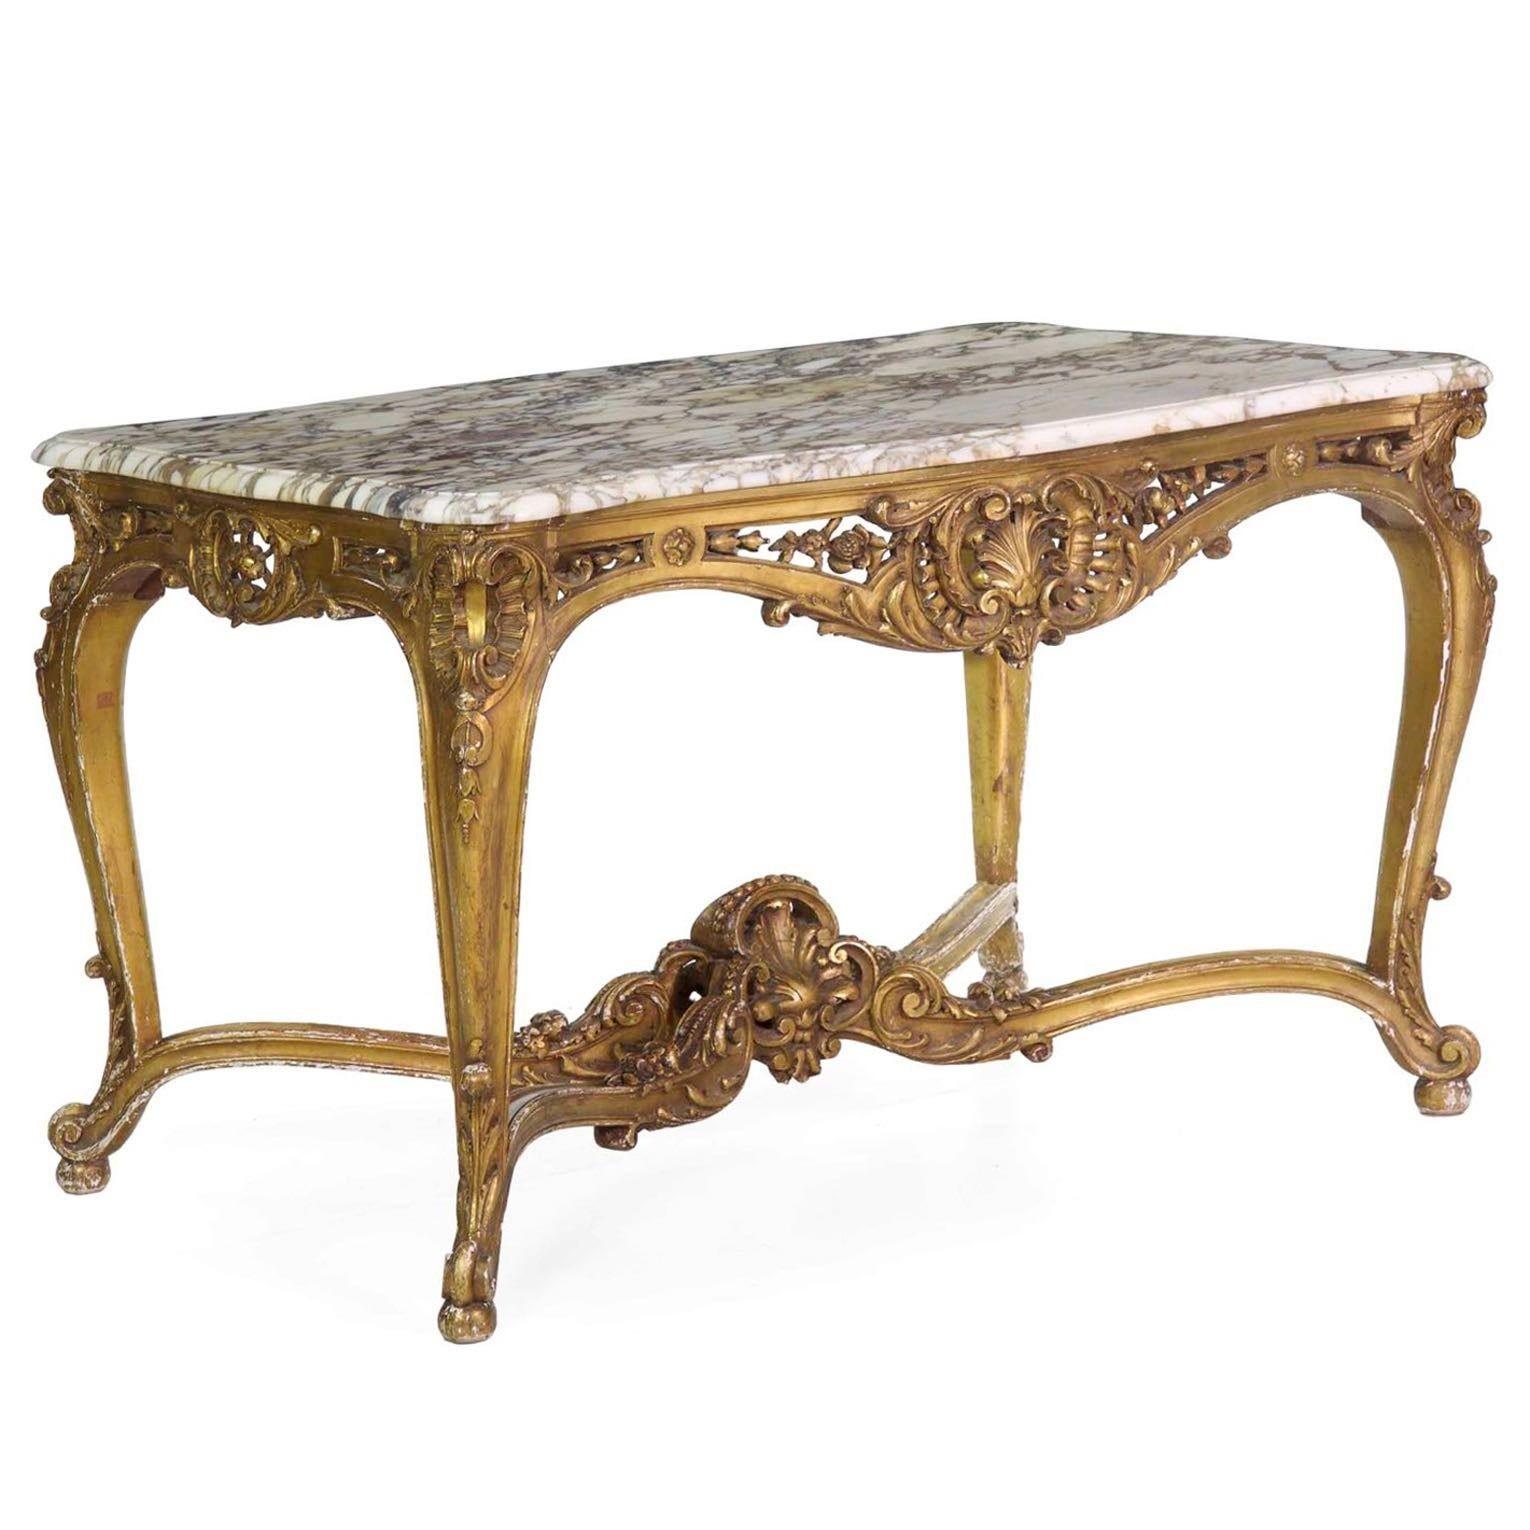 FINE FRENCH LOUS XV GILTWOOD CENTER TABLE
Circa 1870, with original breche violet marble top
Item # 801XGP27E 

An exceptional center table from the third quarter of the 19th century, this magnificent presentation piece was designed to be the